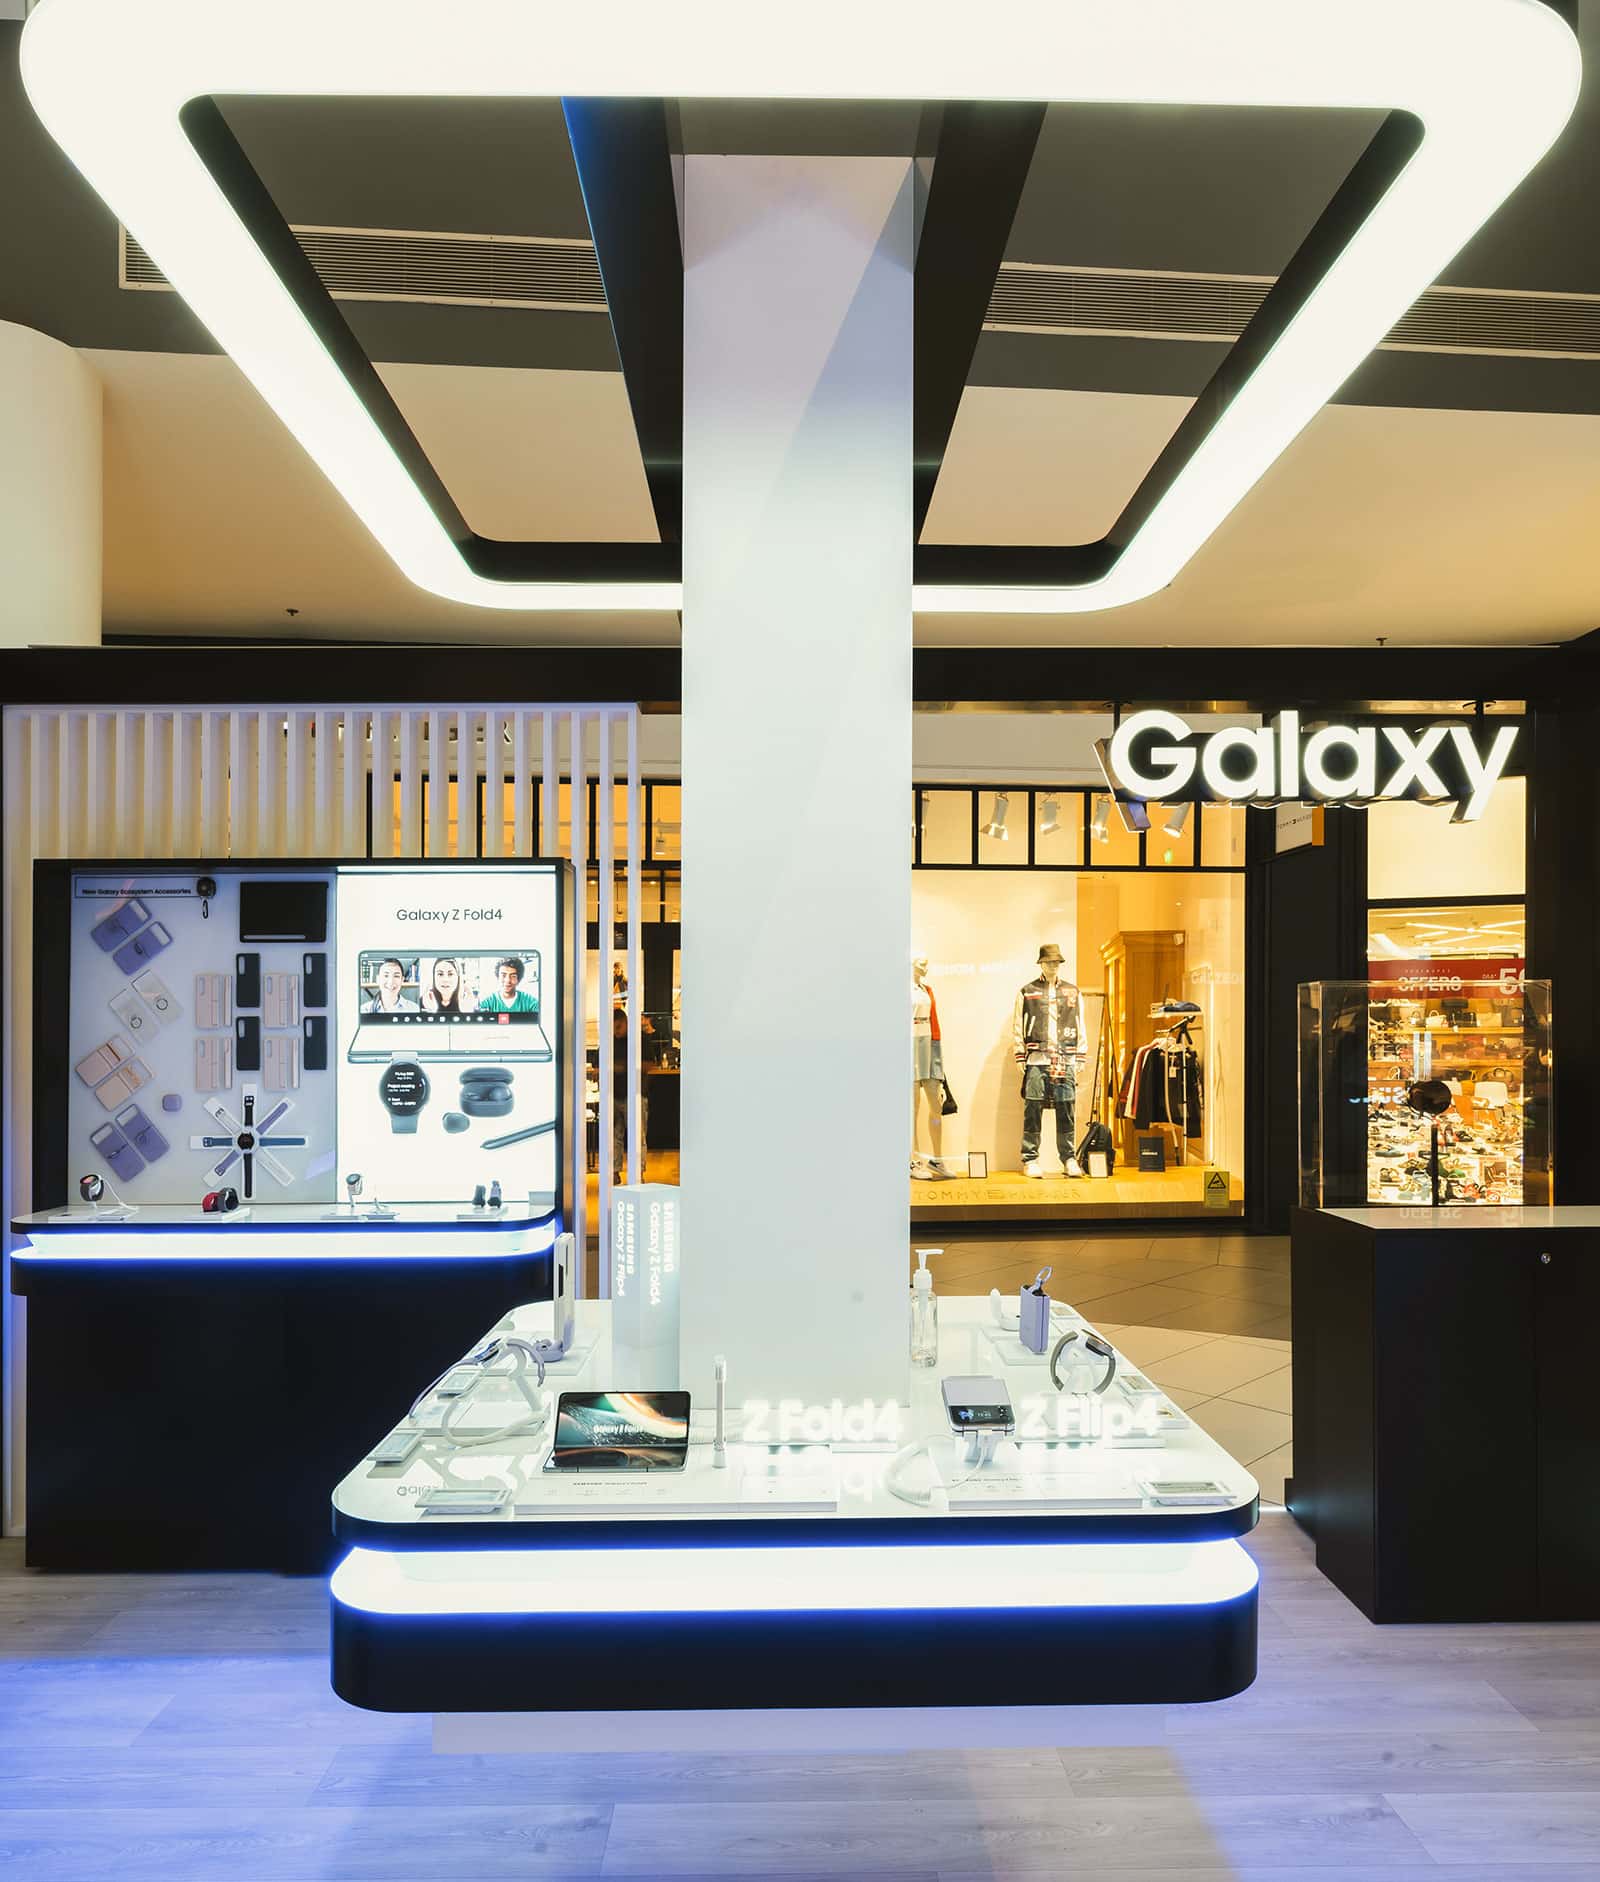 Samsung Pop-Up Stores Greece, Samsung Galaxy Pop-Up stores in Athens and Thessaloniki